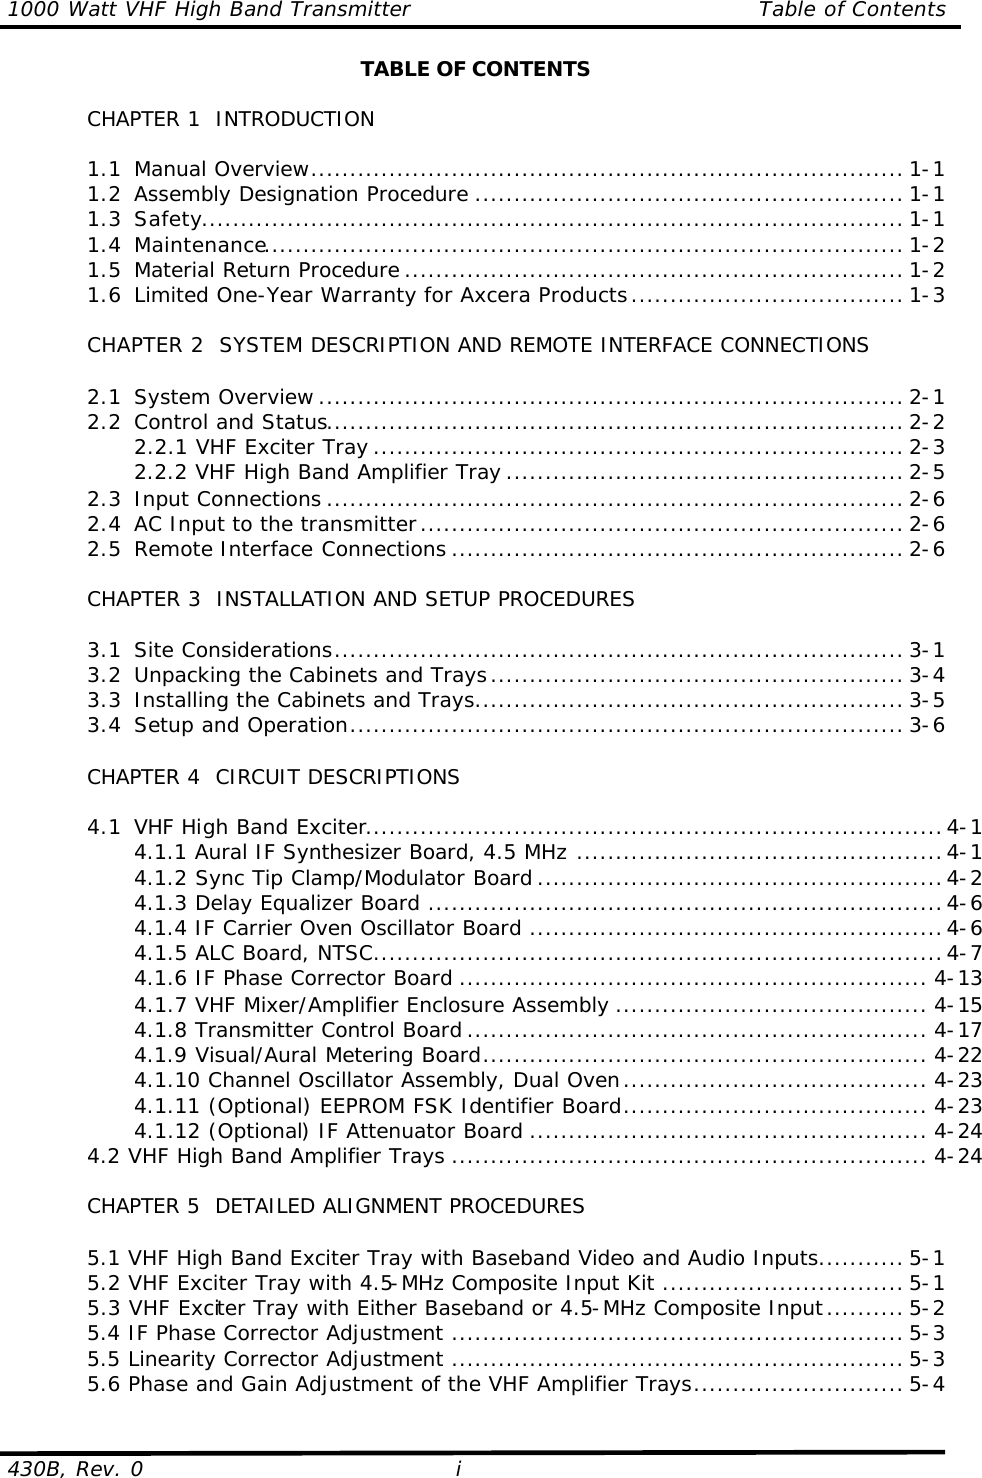 1000 Watt VHF High Band Transmitter Table of Contents  430B, Rev. 0 i TABLE OF CONTENTS   CHAPTER 1  INTRODUCTION   1.1 Manual Overview............................................................................ 1-1  1.2 Assembly Designation Procedure ....................................................... 1-1  1.3 Safety.......................................................................................... 1-1  1.4 Maintenance.................................................................................. 1-2  1.5 Material Return Procedure ................................................................ 1-2  1.6 Limited One-Year Warranty for Axcera Products................................... 1-3   CHAPTER 2  SYSTEM DESCRIPTION AND REMOTE INTERFACE CONNECTIONS   2.1 System Overview ........................................................................... 2-1  2.2 Control and Status.......................................................................... 2-2     2.2.1 VHF Exciter Tray .................................................................... 2-3     2.2.2 VHF High Band Amplifier Tray ................................................... 2-5  2.3 Input Connections .......................................................................... 2-6  2.4 AC Input to the transmitter.............................................................. 2-6  2.5 Remote Interface Connections .......................................................... 2-6       CHAPTER 3  INSTALLATION AND SETUP PROCEDURES     3.1 Site Considerations......................................................................... 3-1  3.2 Unpacking the Cabinets and Trays..................................................... 3-4  3.3 Installing the Cabinets and Trays....................................................... 3-5  3.4 Setup and Operation....................................................................... 3-6   CHAPTER 4  CIRCUIT DESCRIPTIONS   4.1 VHF High Band Exciter..........................................................................4-1     4.1.1 Aural IF Synthesizer Board, 4.5 MHz ...............................................4-1     4.1.2 Sync Tip Clamp/Modulator Board ....................................................4-2     4.1.3 Delay Equalizer Board ..................................................................4-6     4.1.4 IF Carrier Oven Oscillator Board .....................................................4-6     4.1.5 ALC Board, NTSC.........................................................................4-7     4.1.6 IF Phase Corrector Board ............................................................ 4-13     4.1.7 VHF Mixer/Amplifier Enclosure Assembly ........................................ 4-15     4.1.8 Transmitter Control Board ........................................................... 4-17     4.1.9 Visual/Aural Metering Board......................................................... 4-22     4.1.10 Channel Oscillator Assembly, Dual Oven....................................... 4-23     4.1.11 (Optional) EEPROM FSK Identifier Board....................................... 4-23     4.1.12 (Optional) IF Attenuator Board ................................................... 4-24  4.2 VHF High Band Amplifier Trays ............................................................. 4-24   CHAPTER 5  DETAILED ALIGNMENT PROCEDURES   5.1 VHF High Band Exciter Tray with Baseband Video and Audio Inputs........... 5-1  5.2 VHF Exciter Tray with 4.5-MHz Composite Input Kit ............................... 5-1  5.3 VHF Exciter Tray with Either Baseband or 4.5-MHz Composite Input.......... 5-2  5.4 IF Phase Corrector Adjustment .......................................................... 5-3  5.5 Linearity Corrector Adjustment .......................................................... 5-3 5.6 Phase and Gain Adjustment of the VHF Amplifier Trays........................... 5-4 